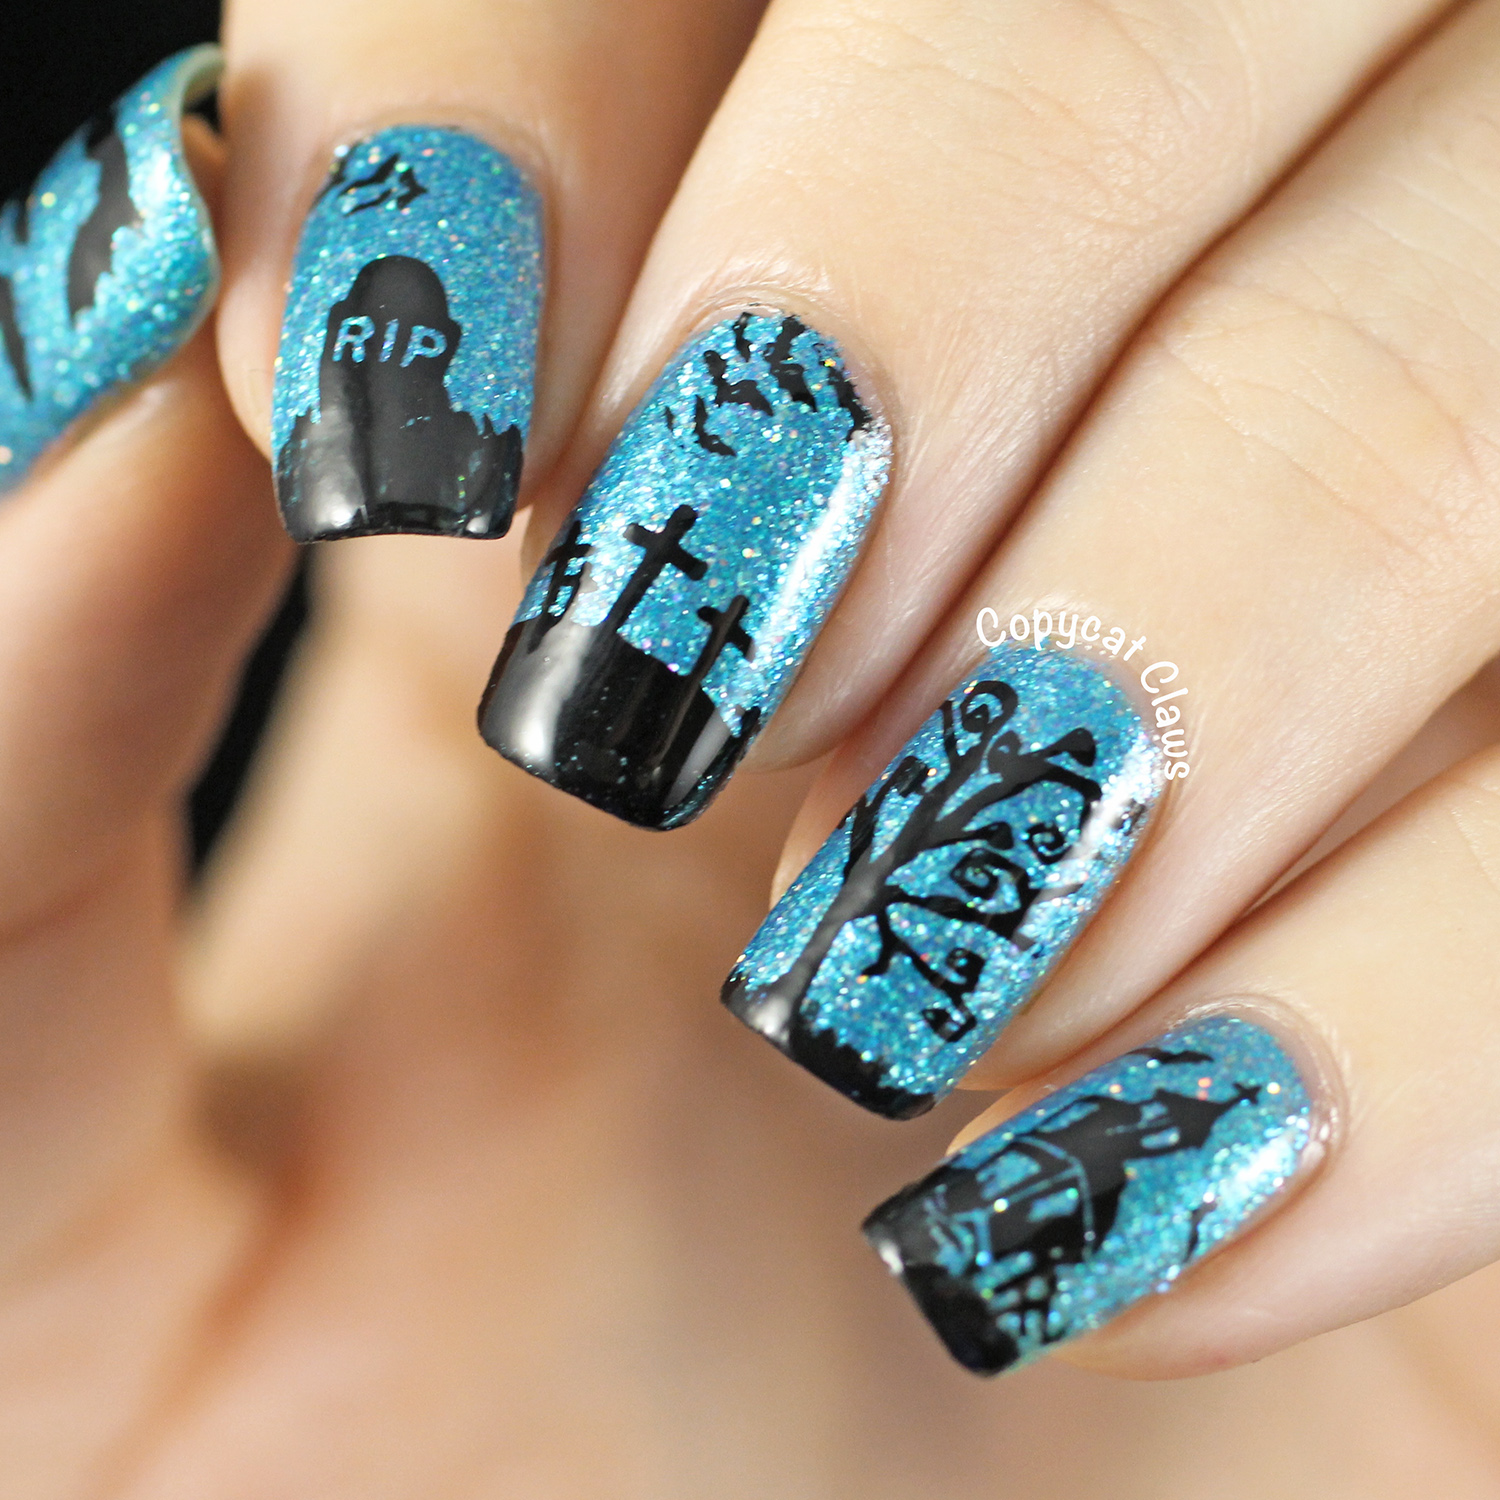 Copycat Claws: Sunday Stamping - Halloween Nails